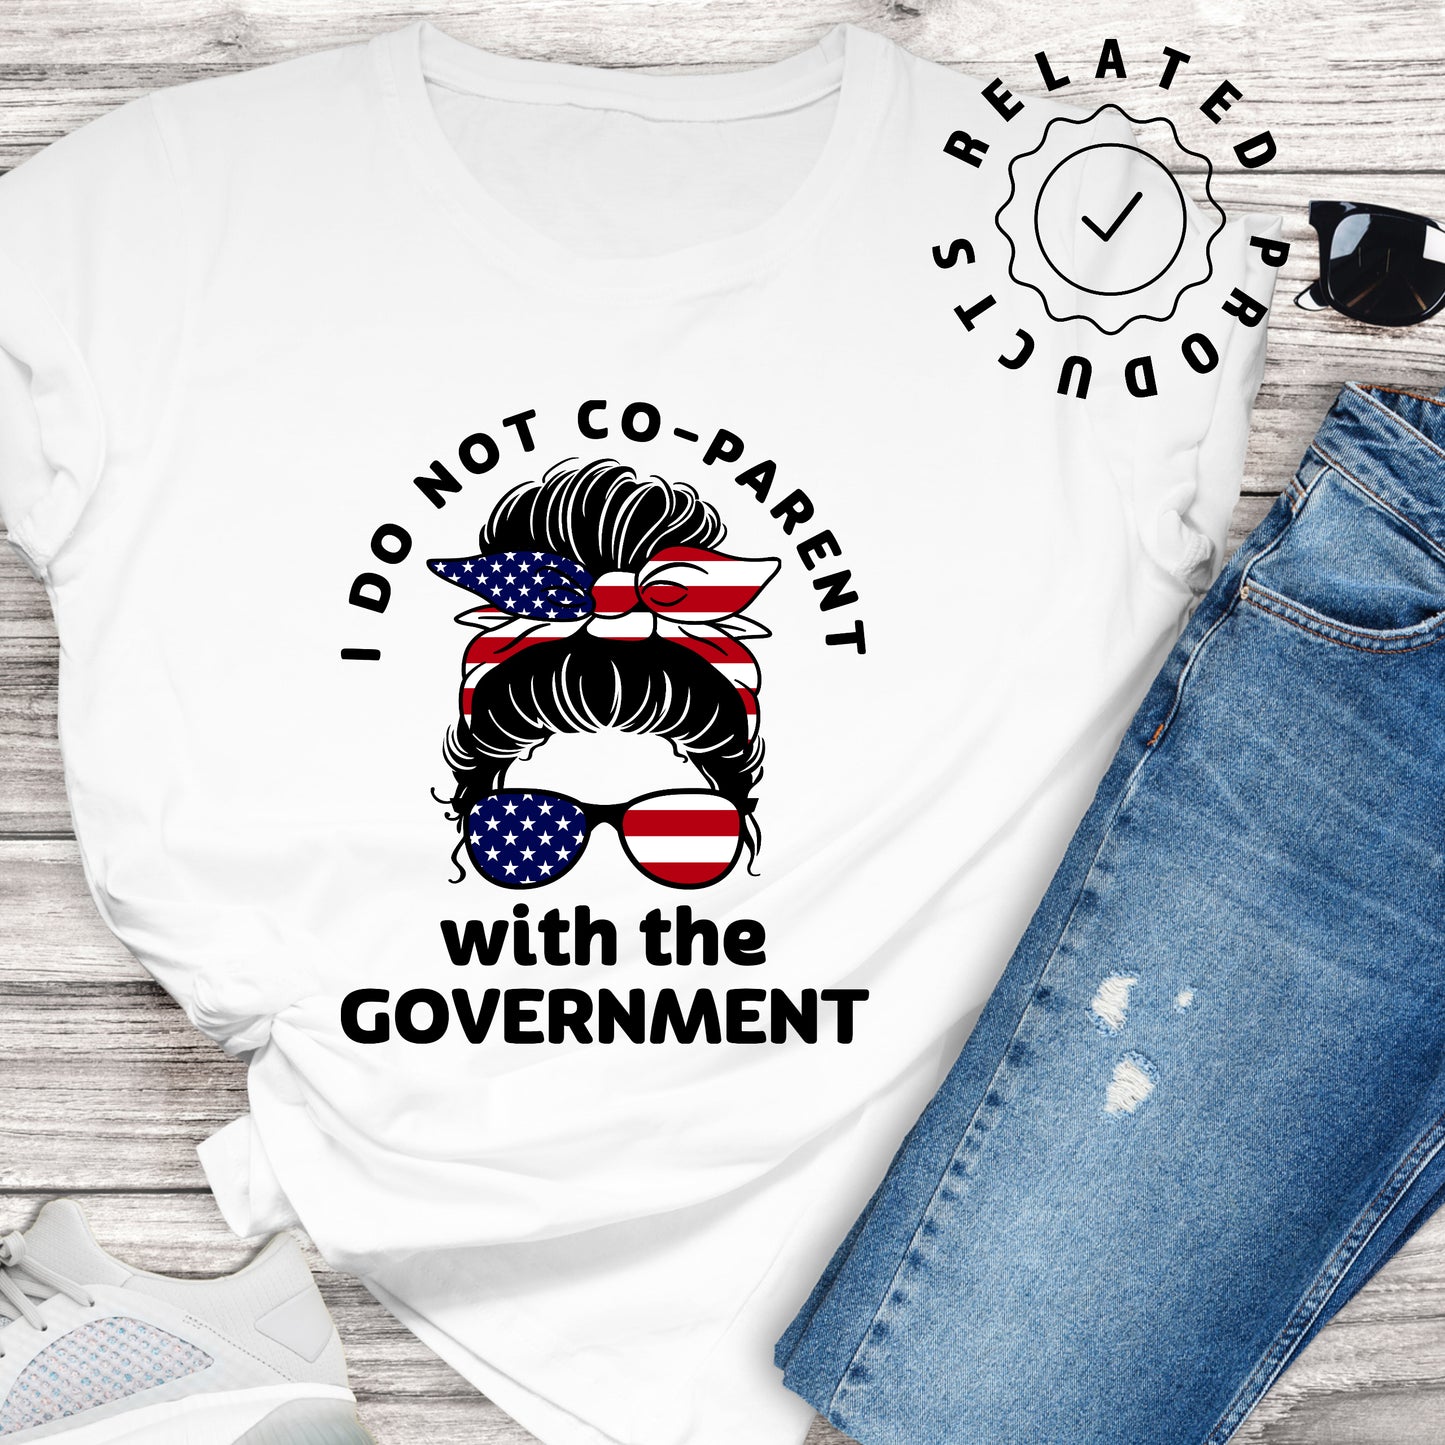 Conservative Mom T-Shirt For I Don't Co-Parent TShirt For American Mom T Shirt With Messy Bun Shirt For Angry Mothers T-Shirt For Fourth Of July TShirt For Patriotic Moms